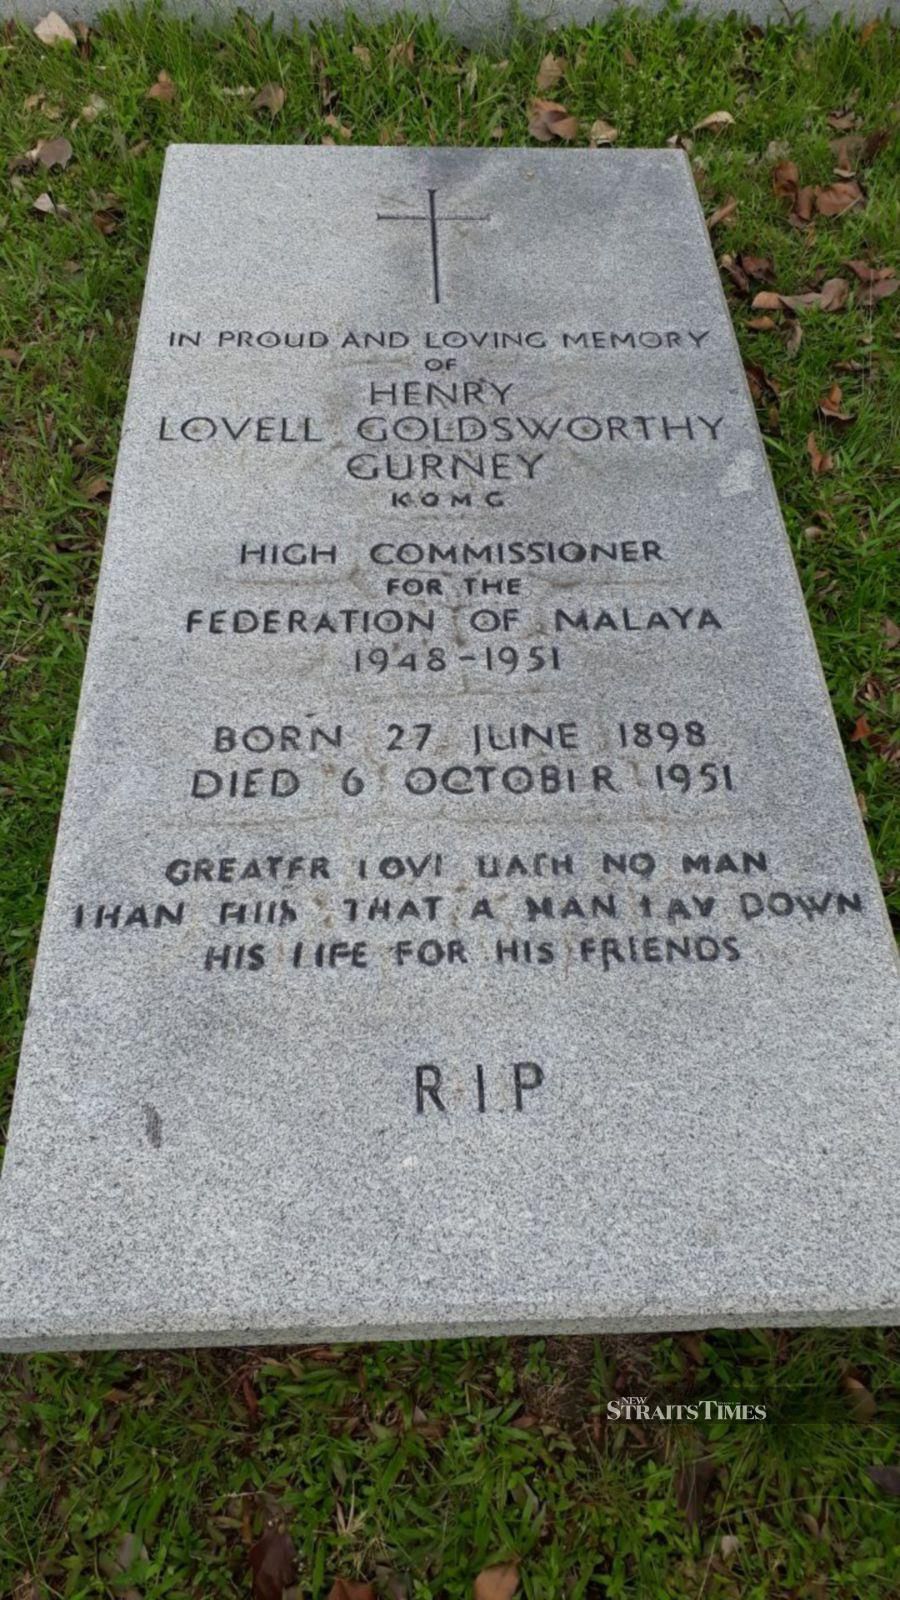 A close-up of the grave of the late Sir Henry Gurney at the Cheras Christian cemetery in Jalan Kuari, Kuala Lumpur. - NSTP/ADRIAN DAVID